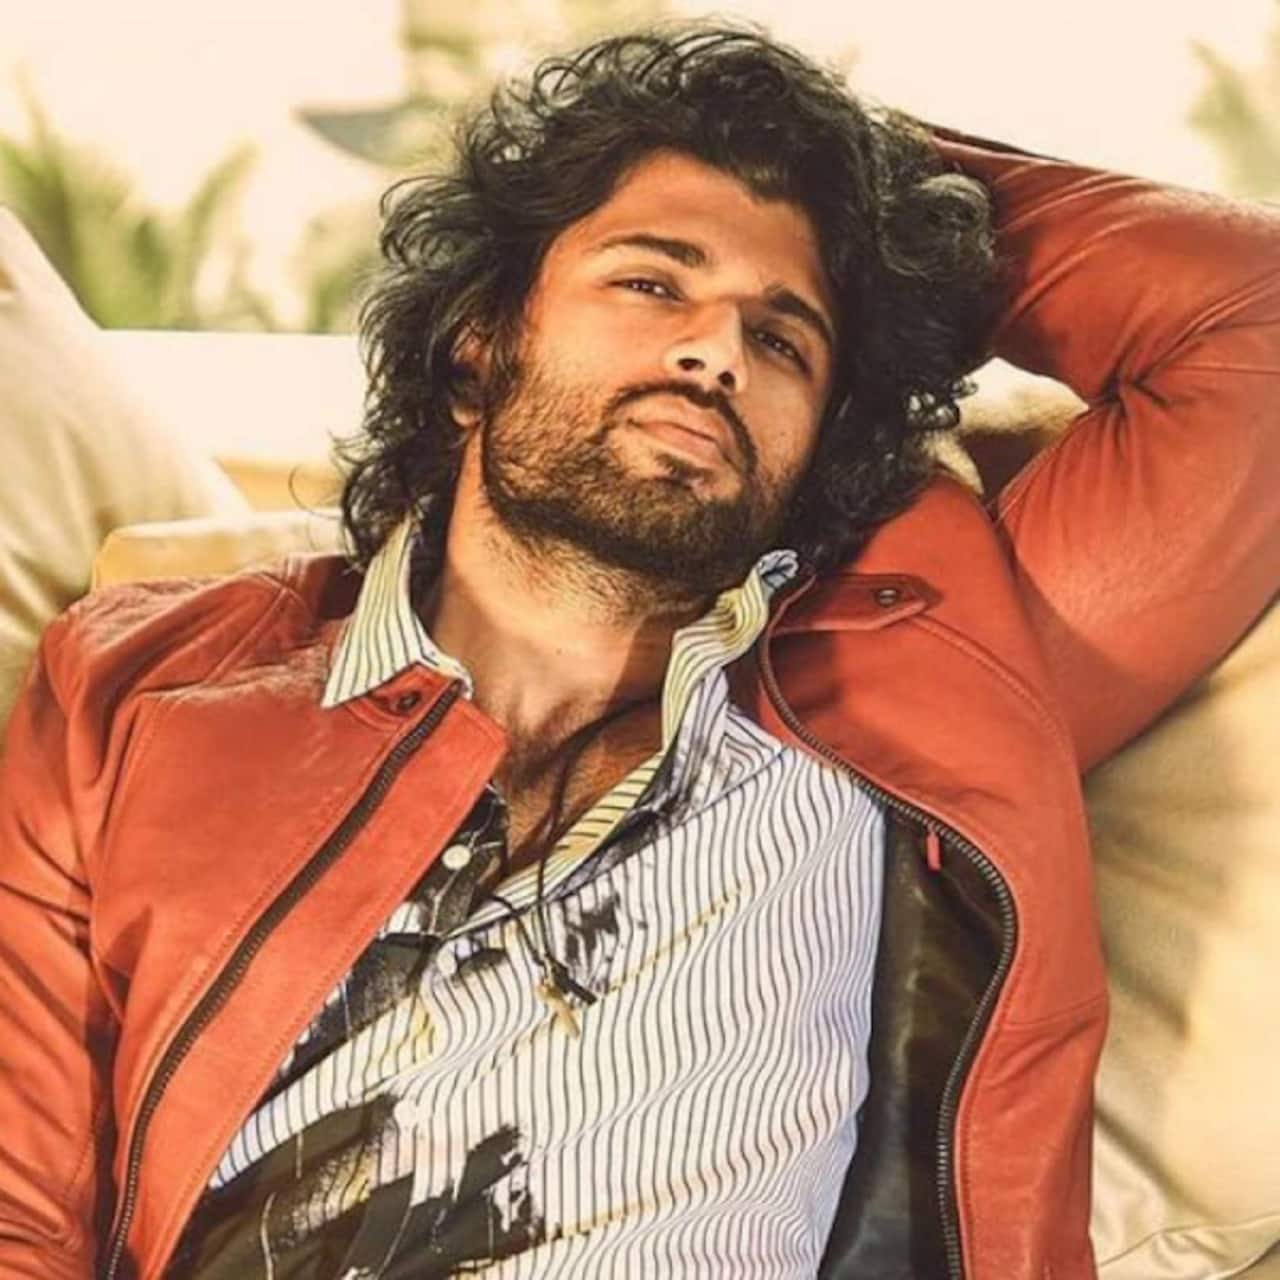 Vijay Deverakonda opens up on being questioned for 12 hours by ED over Liger funding; ‘I went and answered…’